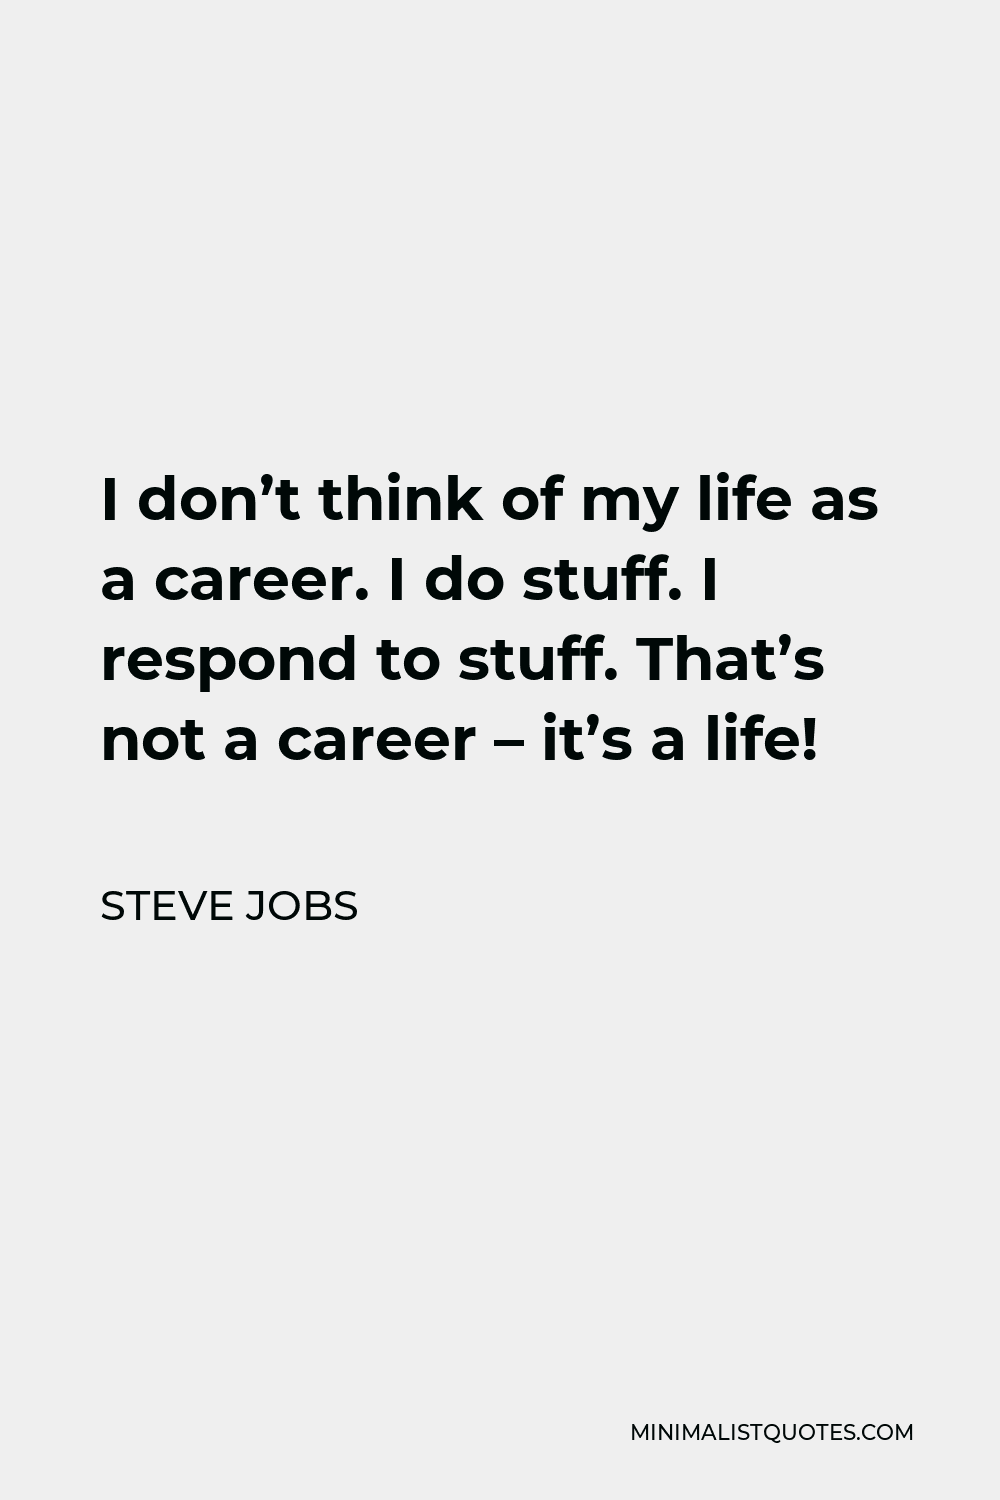 Steve Jobs Quote - I don’t think of my life as a career. I do stuff. I respond to stuff. That’s not a career – it’s a life!